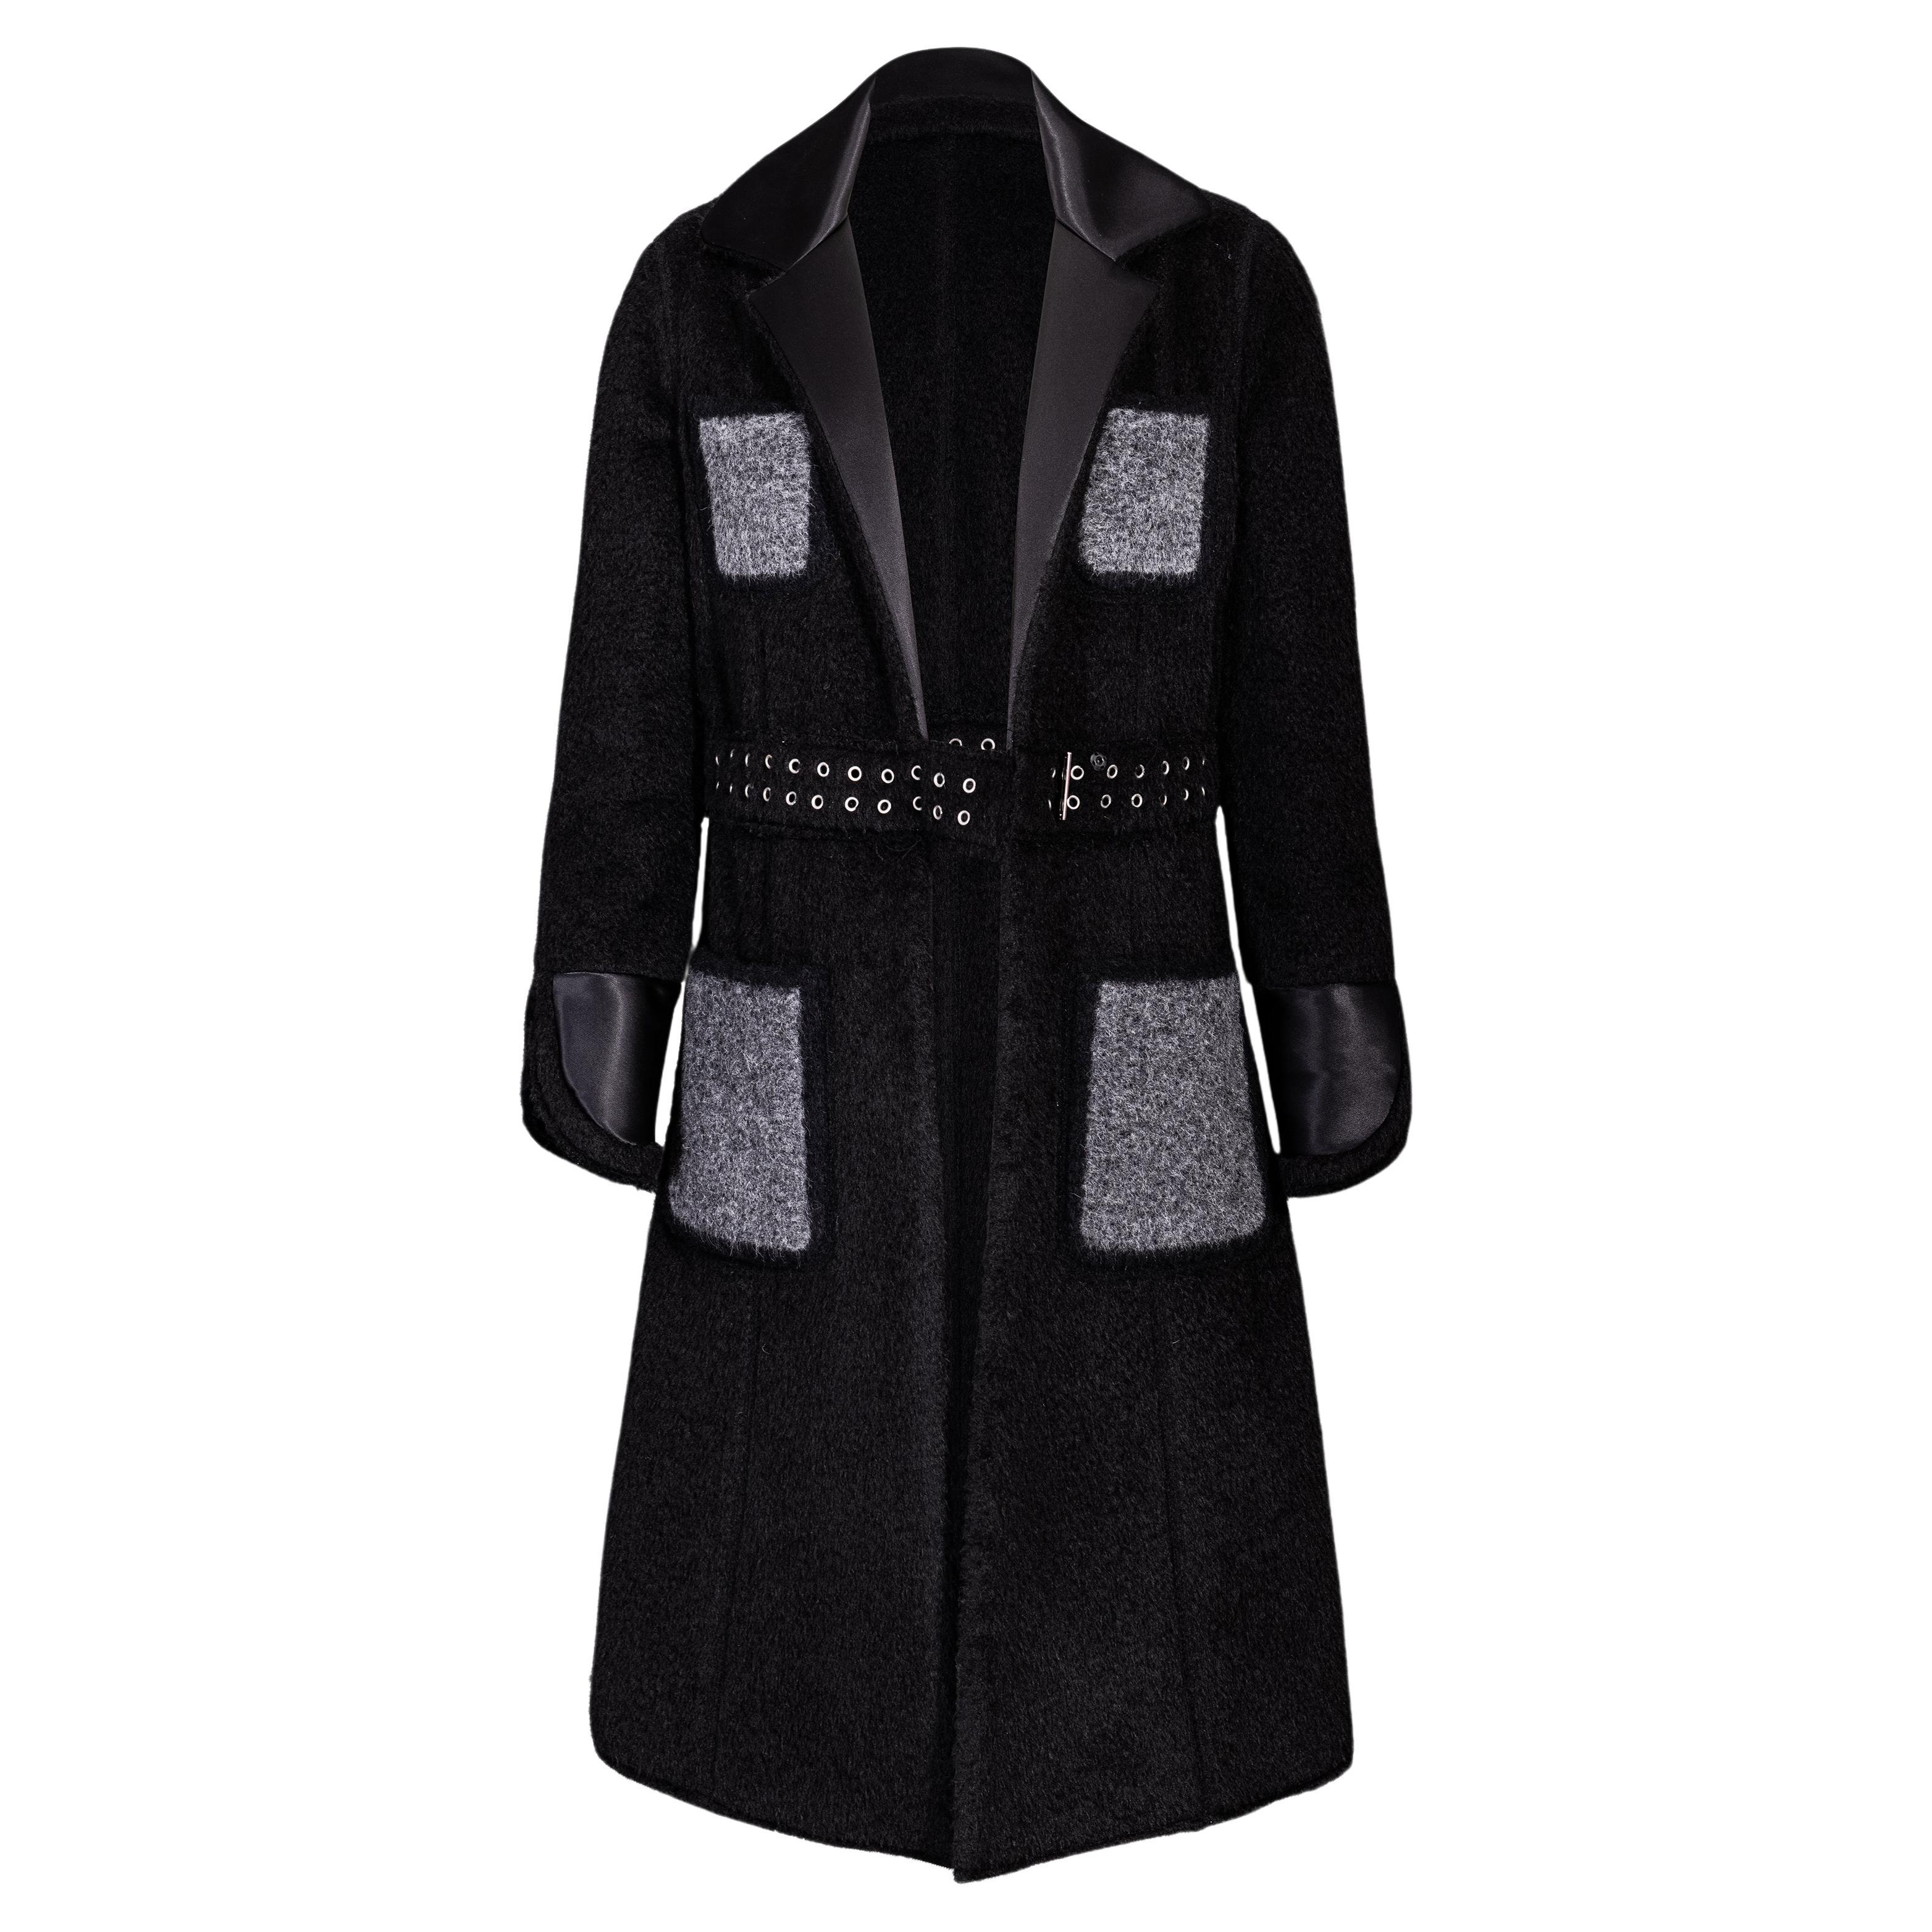 Pre-Fall 2014 Céline by Phoebe Philo Black Shearling Coat with Gray Accents For Sale 2